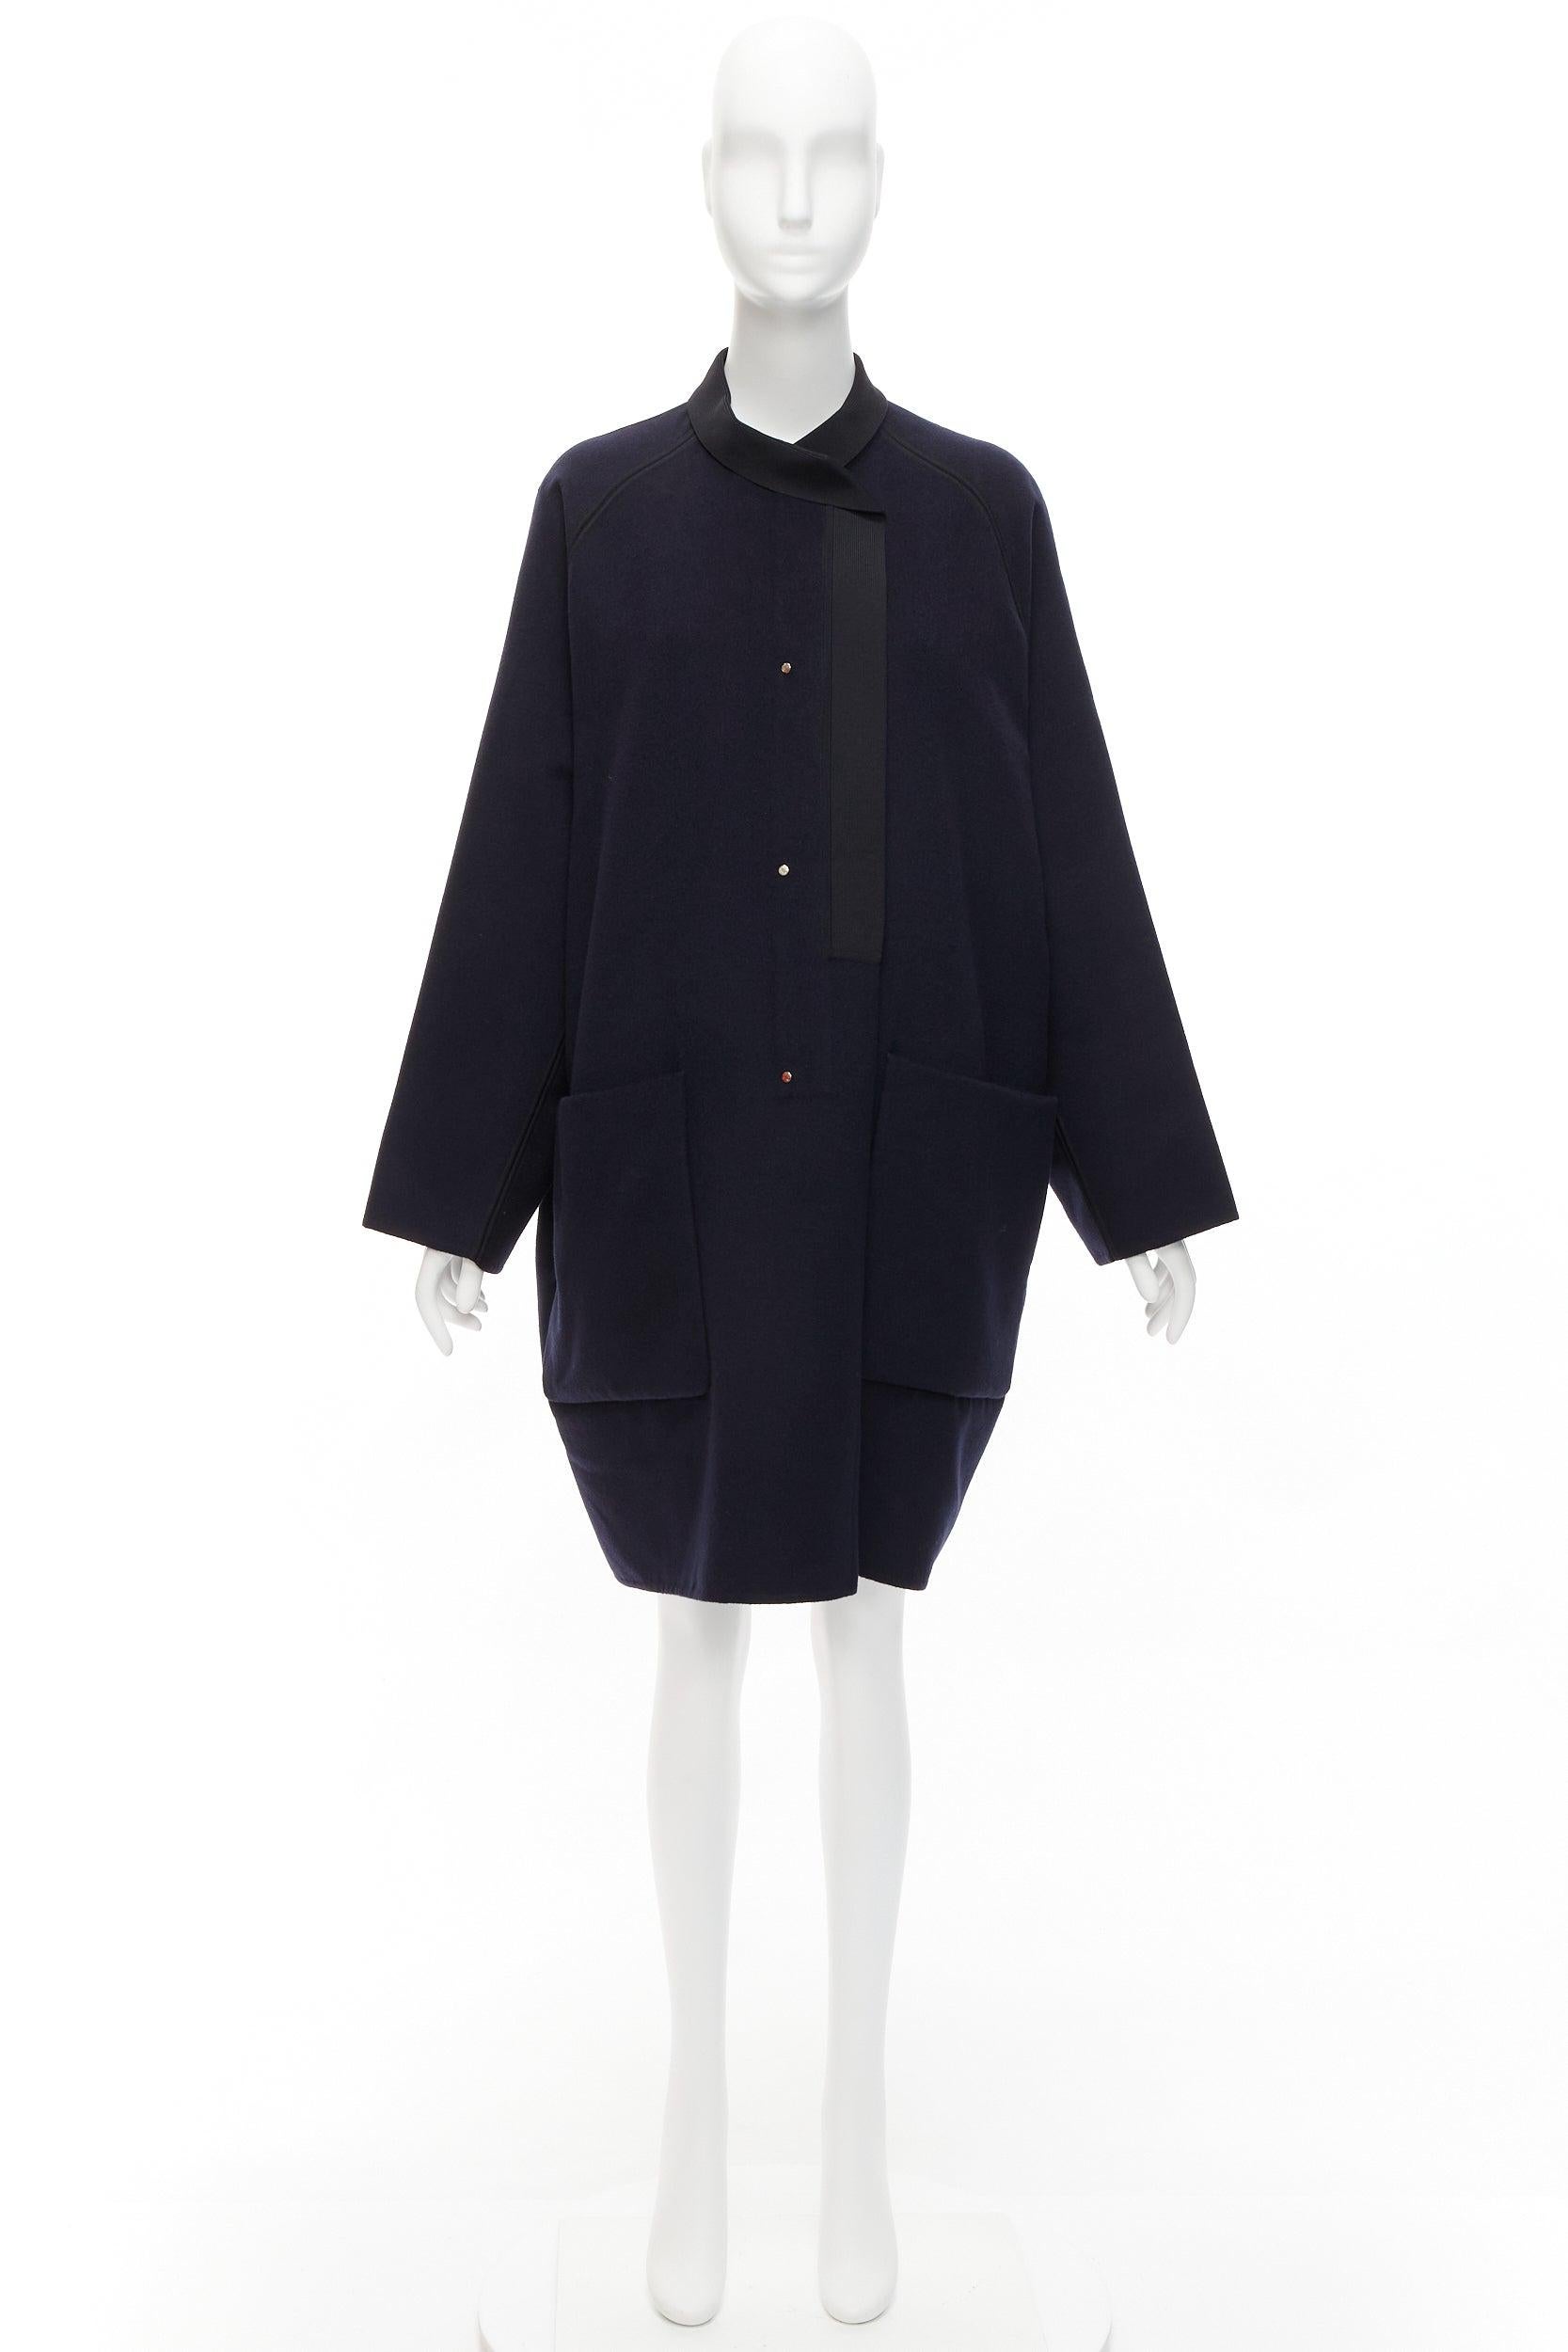 rare HERMES Martin Margiela double faced cashmere oversized cocoon coat FR42 XL For Sale 6